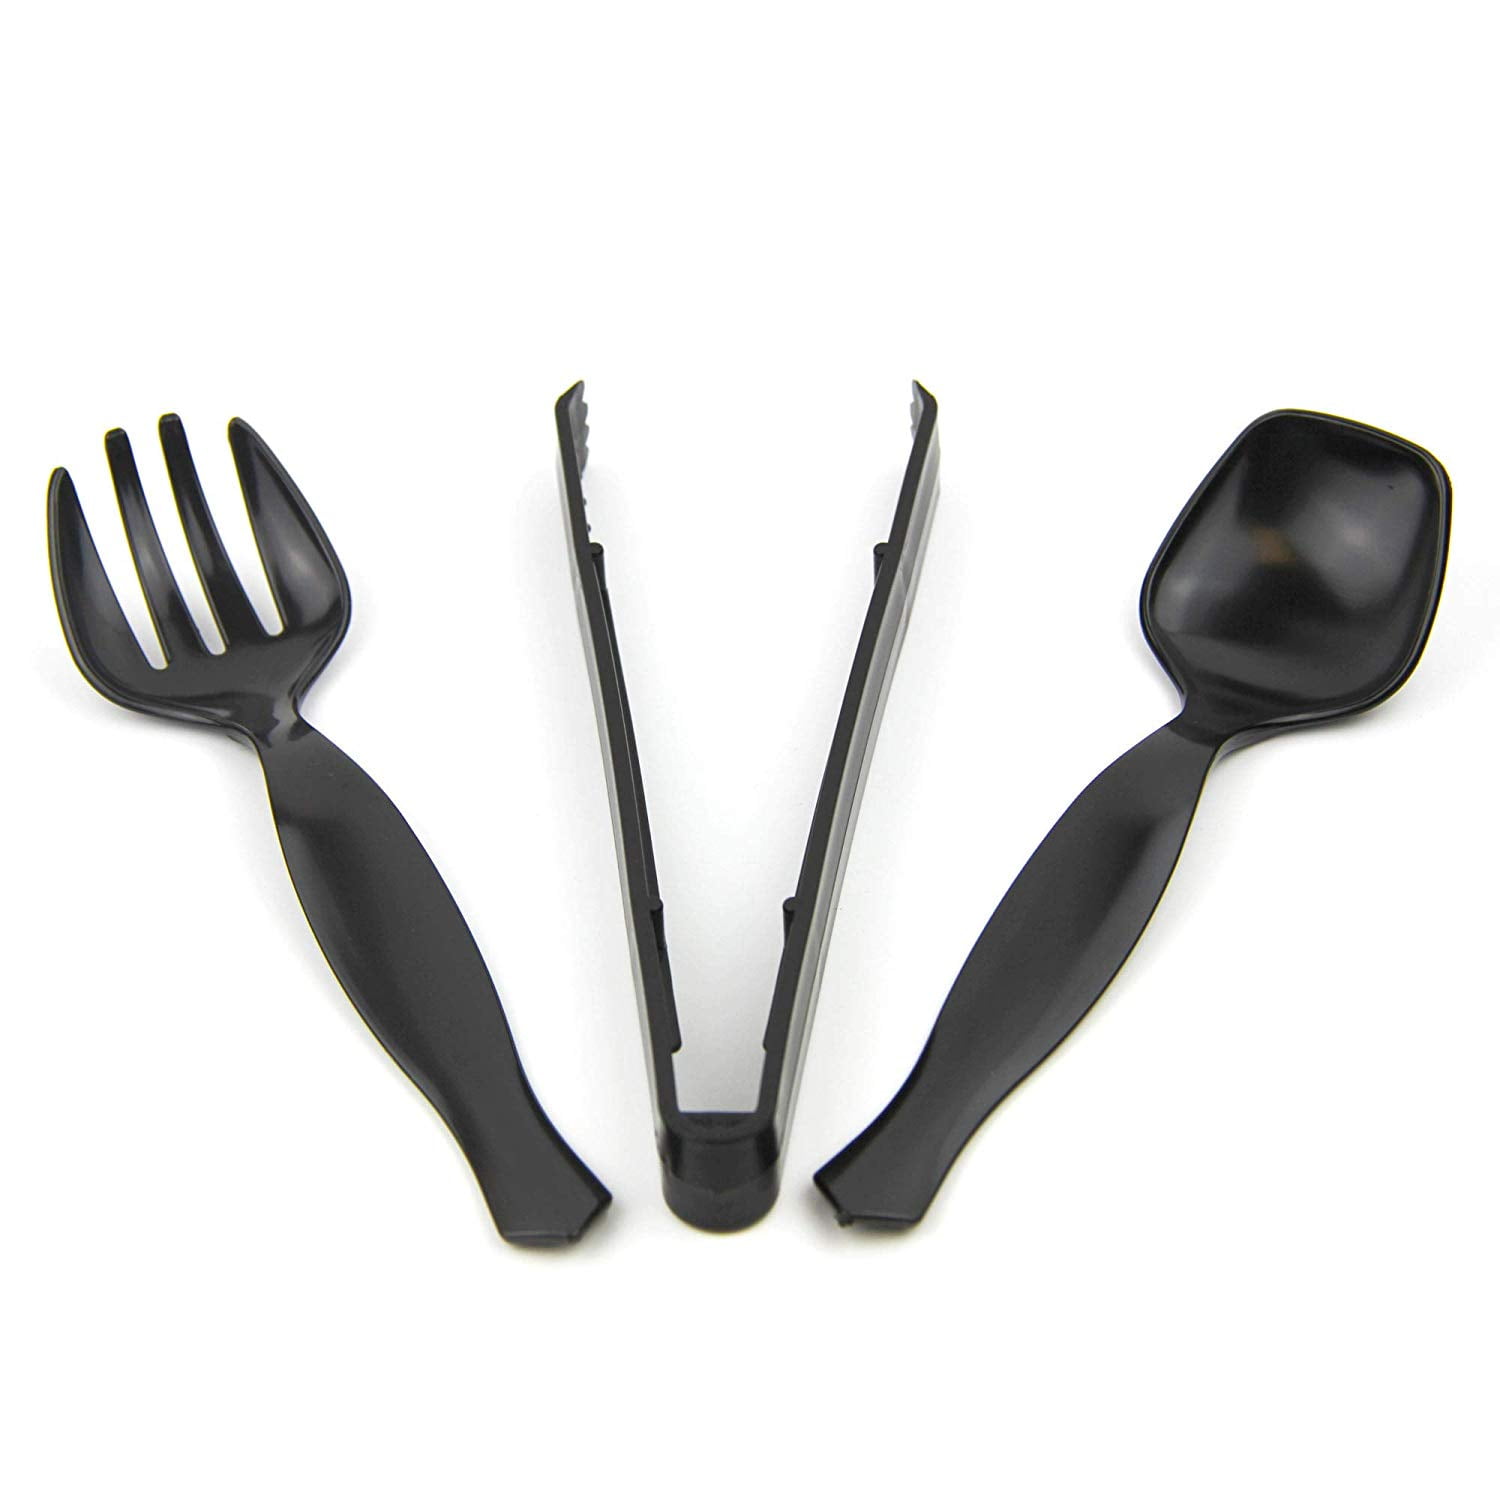 PLASTIC FORKS PICKER HEAVY DUTY CLEAR PLASTIC FORKS DISPOSABLE CUTLERY PARTY SET 